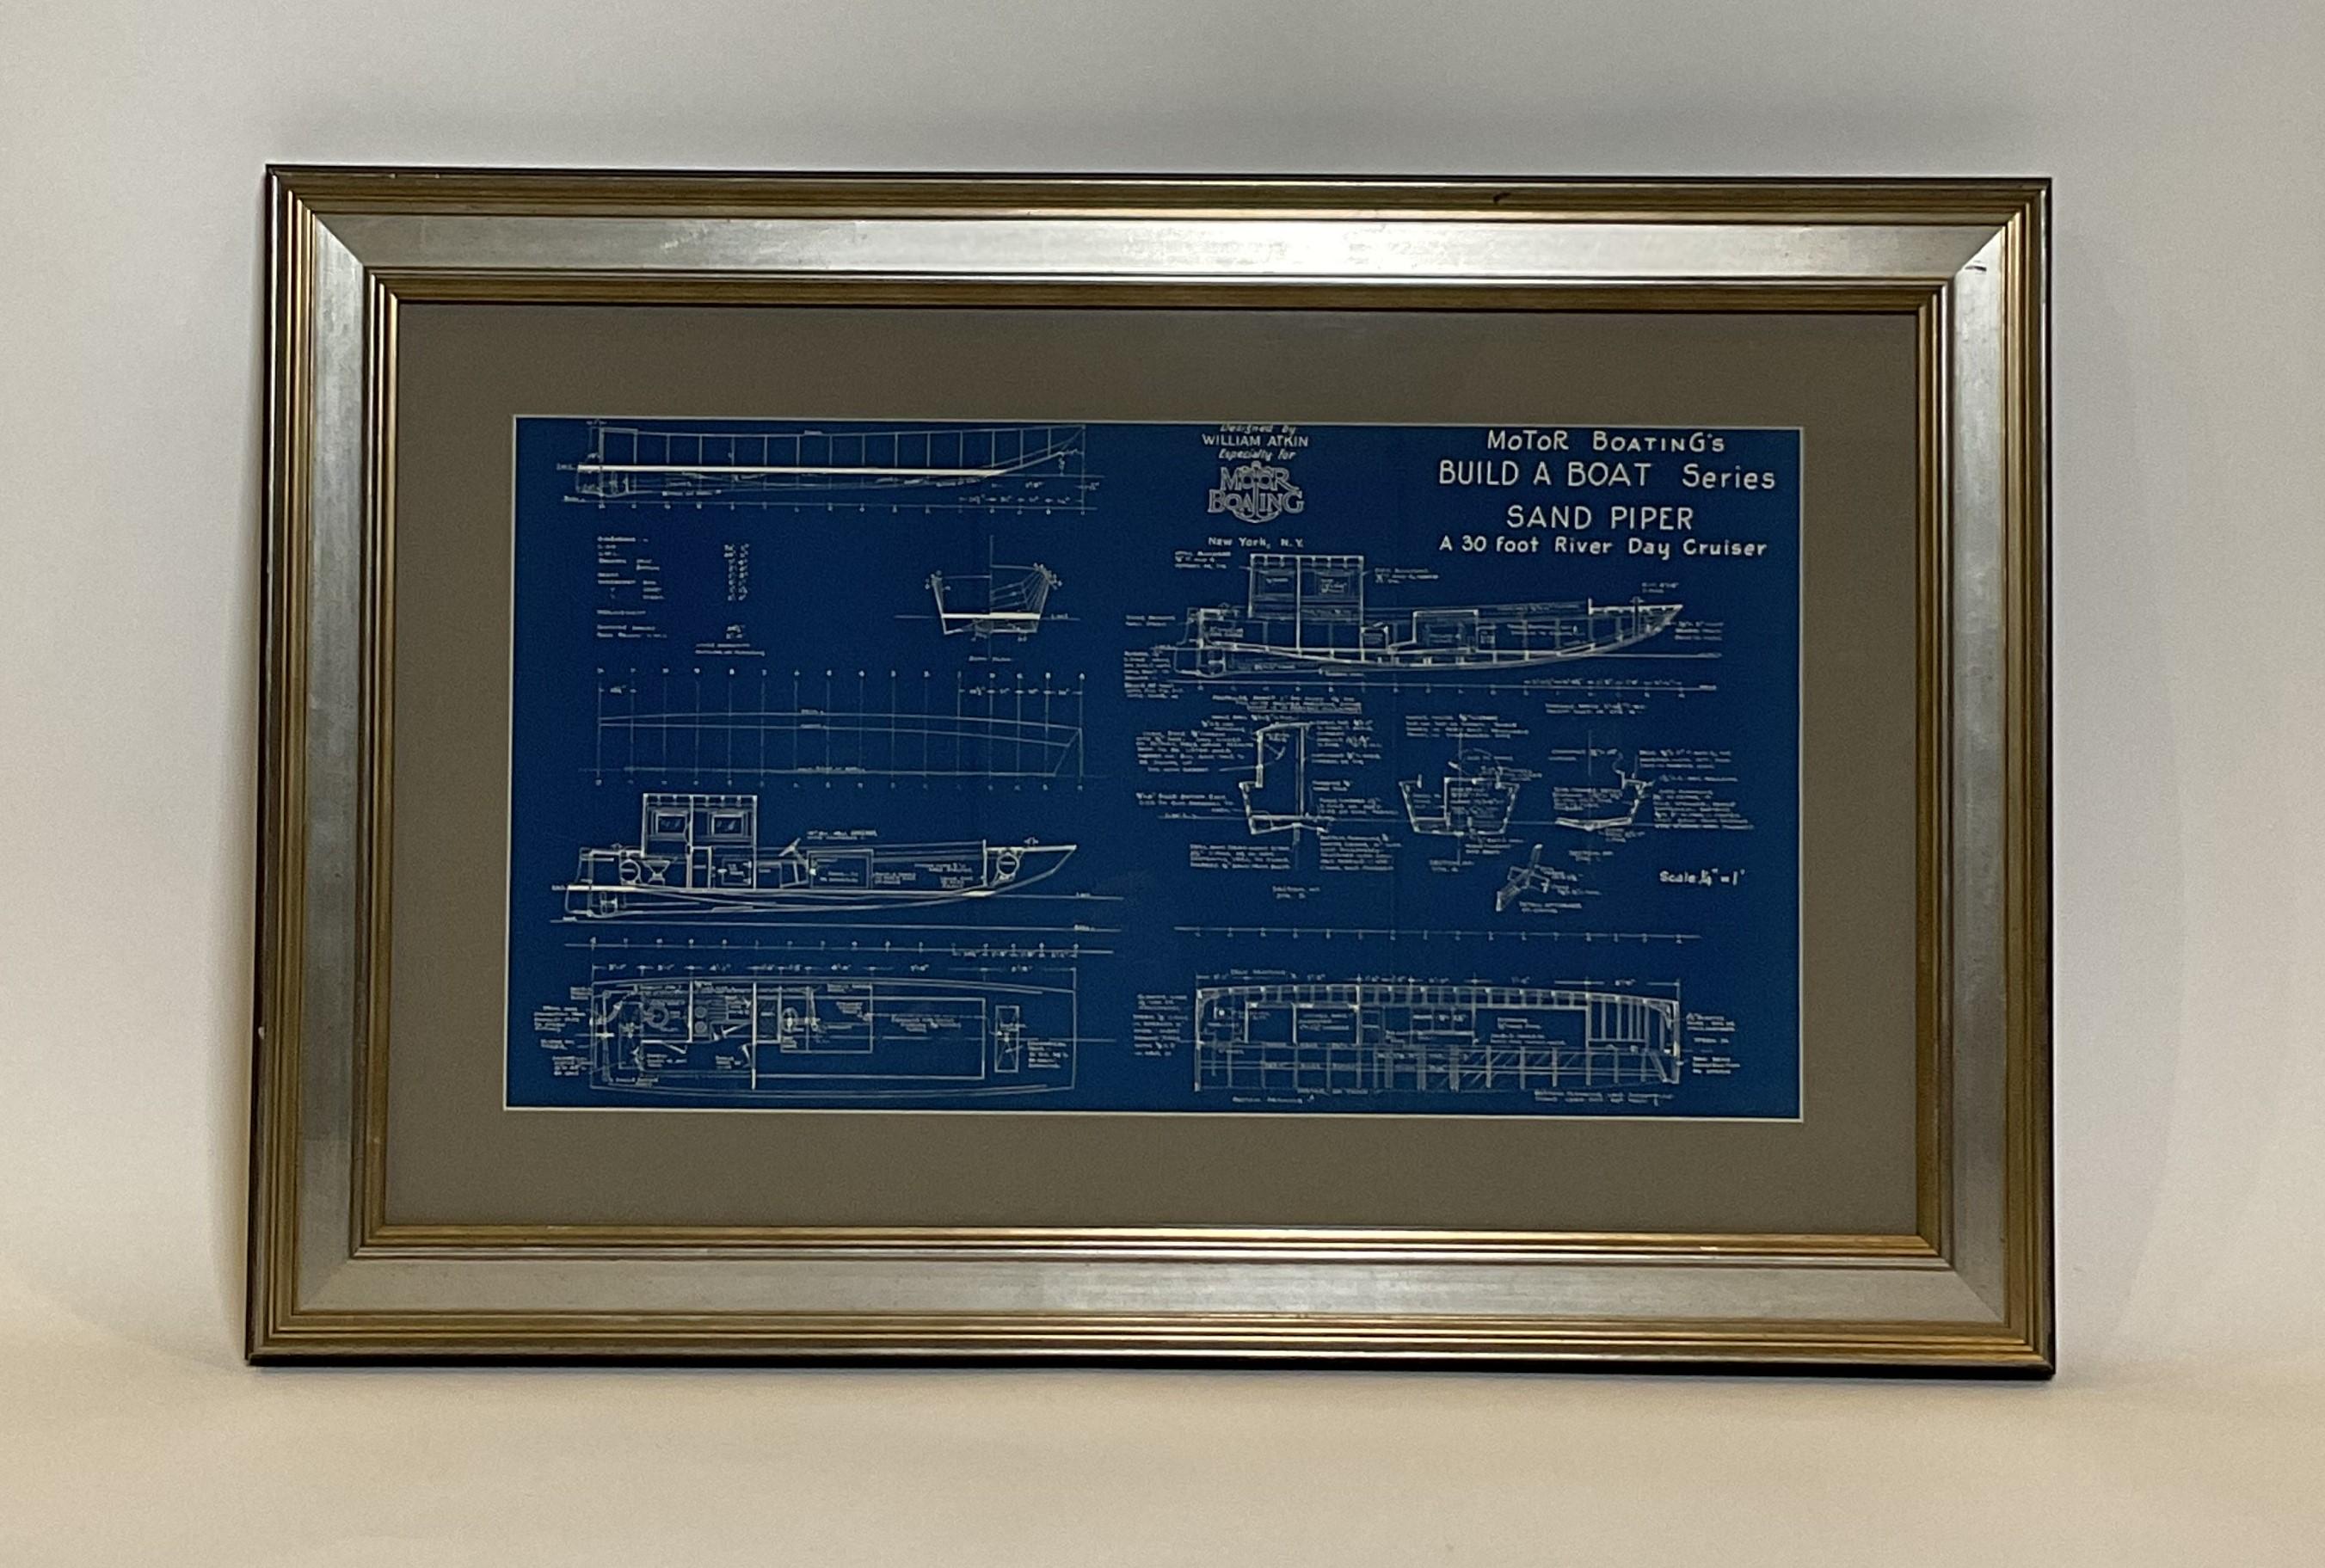 North American Boat Blueprint Showing the Sand Piper For Sale